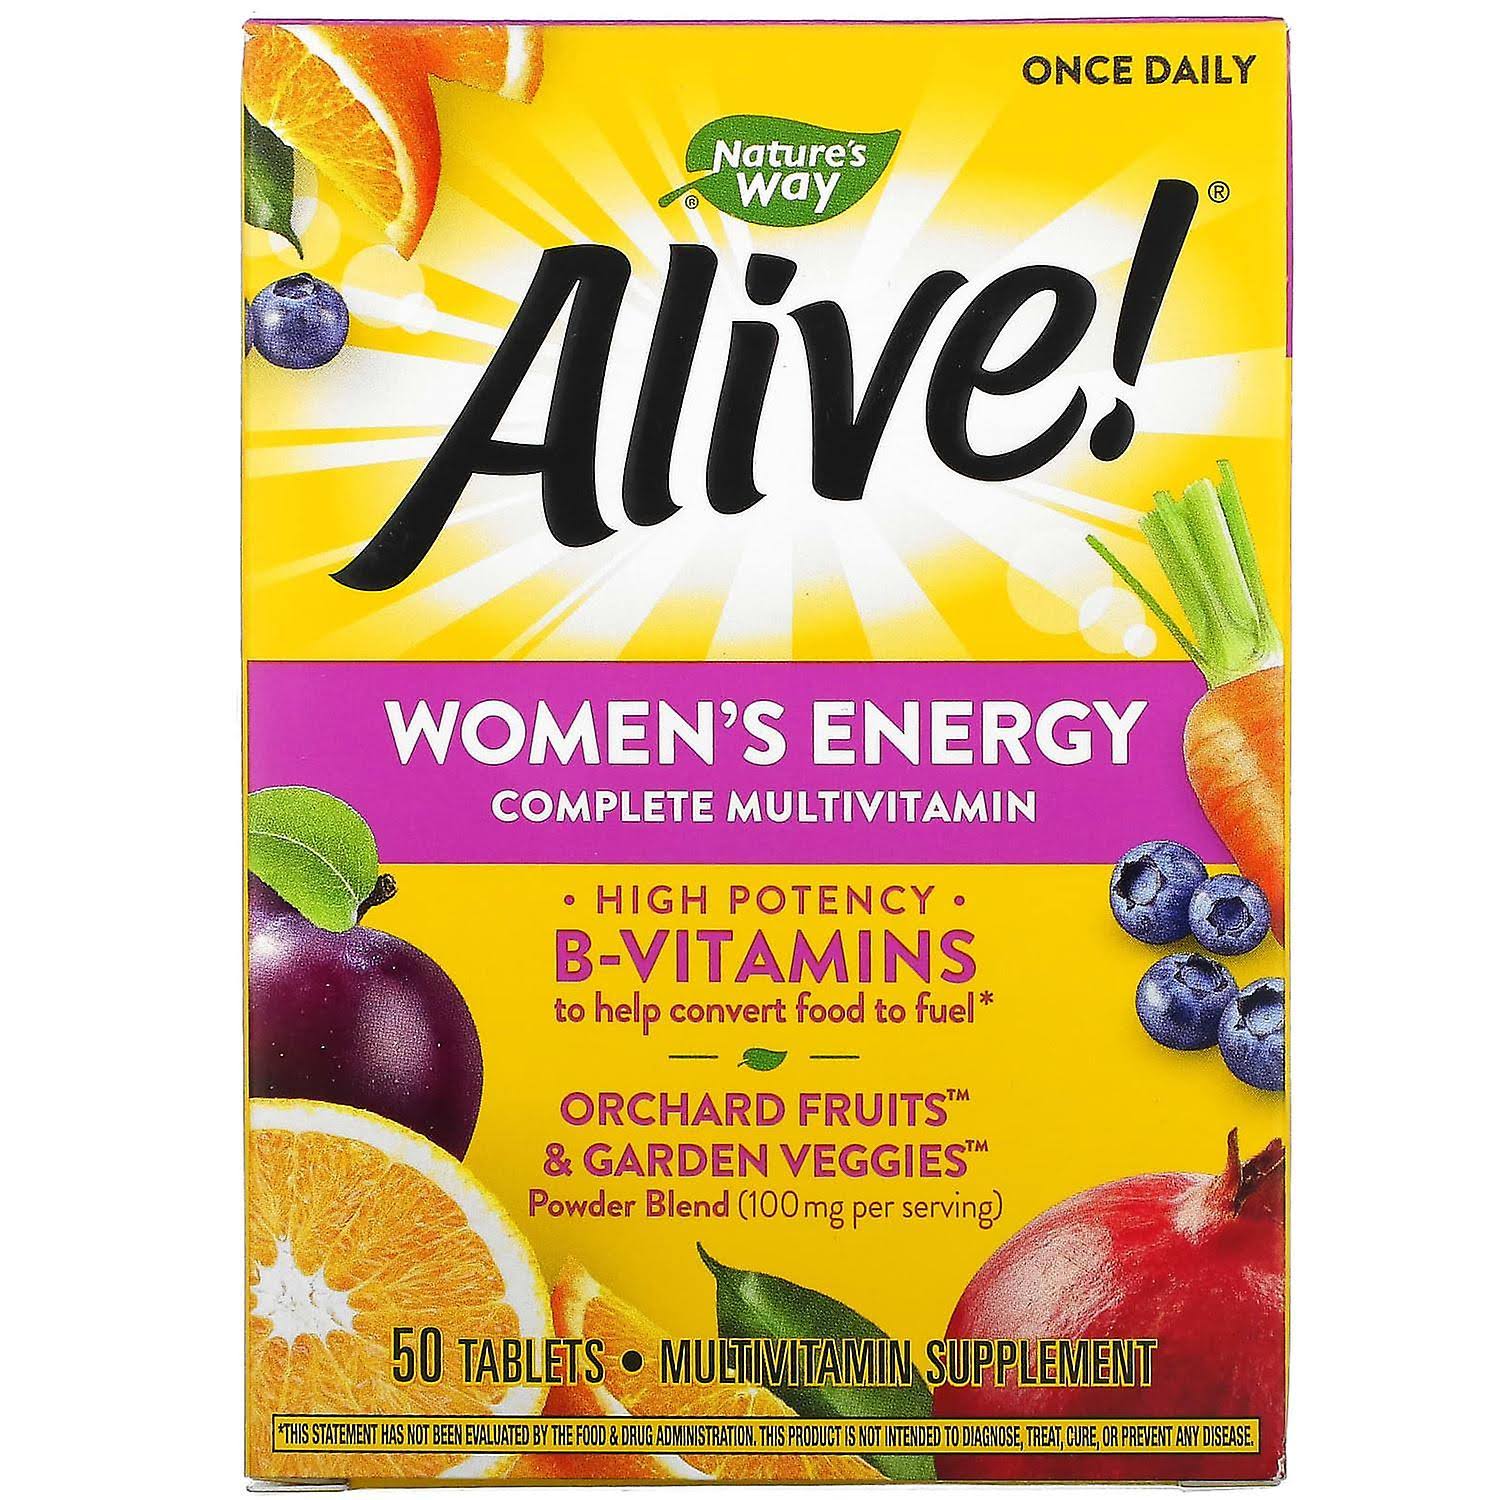 Nature's Way Alive! Women's Energy Multivitamin Tablets, Supports Cellular Energy*, Fruit and Veggie Powder Blend (100mg per Serving), 50 Tablets